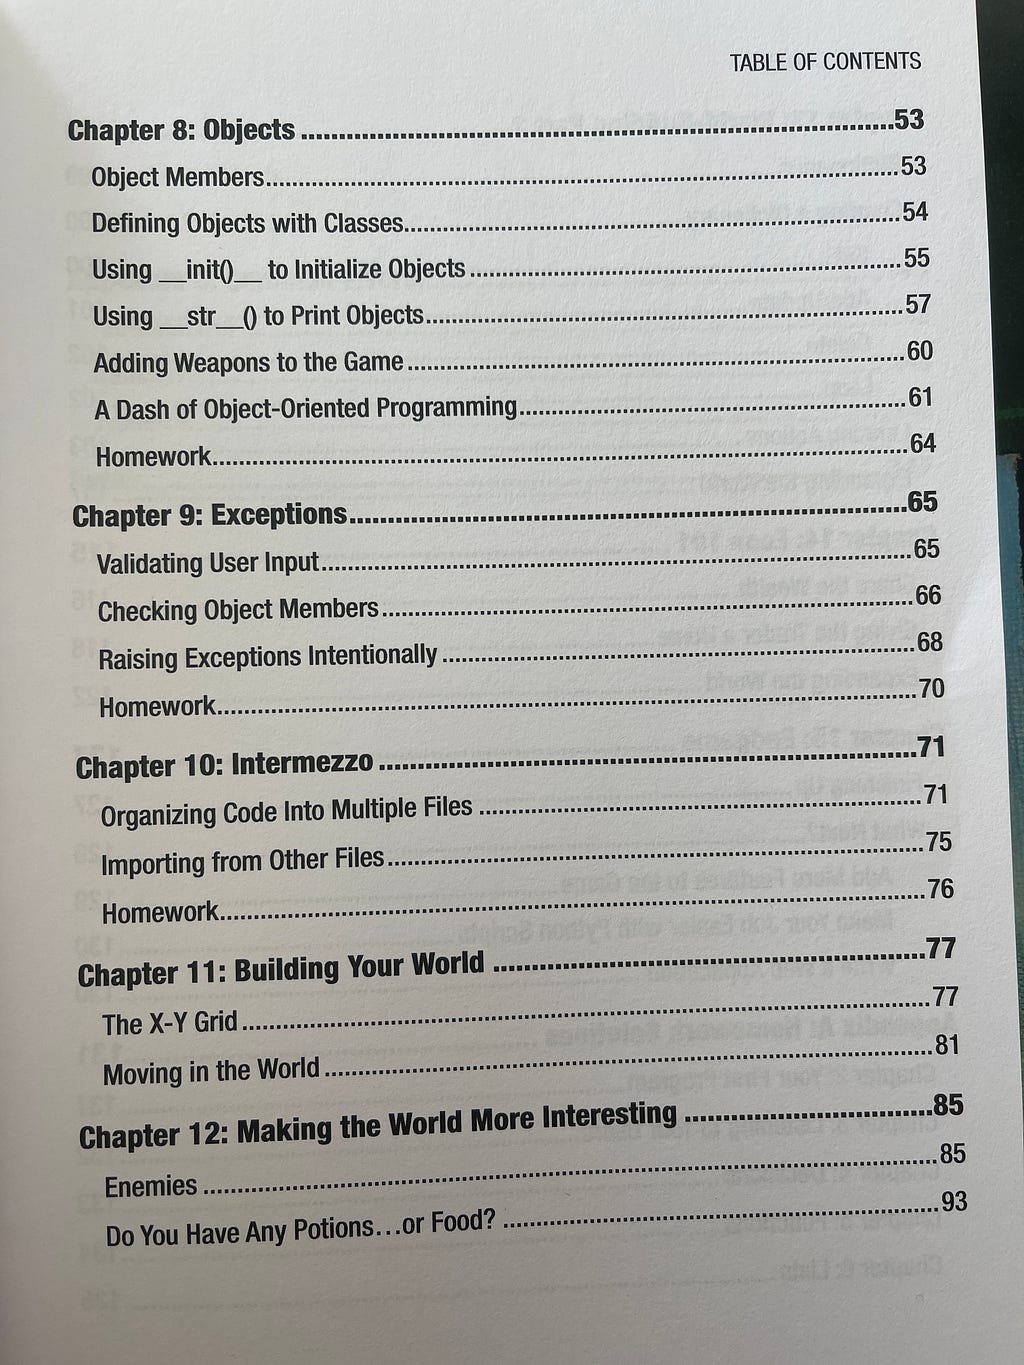 Table of contents for the textbook on writing python-based text adventure games.